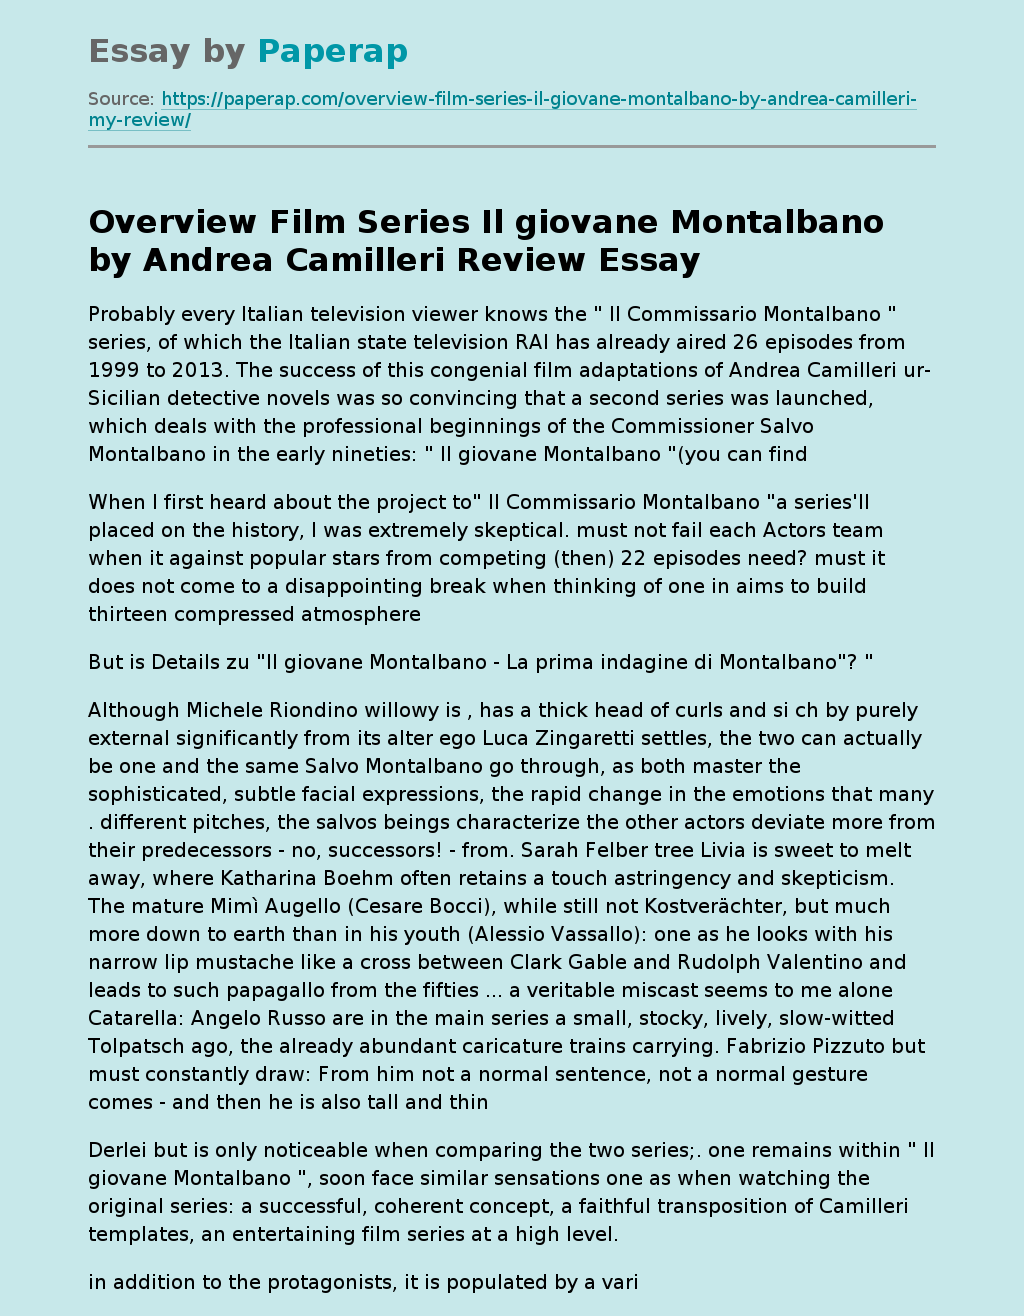 Overview Film Series Il giovane Montalbano by Andrea Camilleri Review